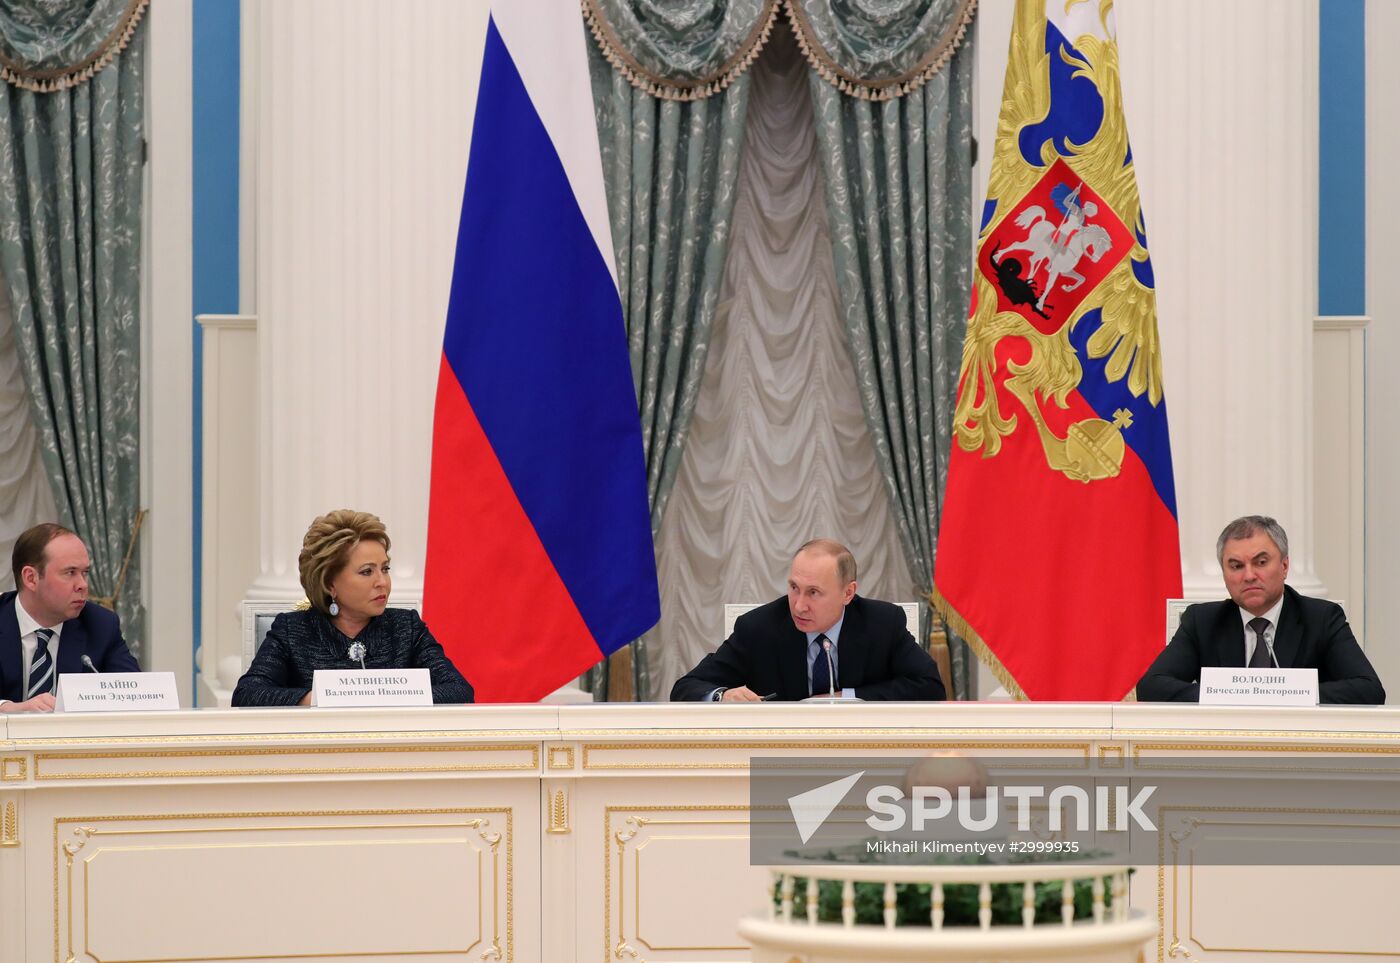 Vladimir Putin meets with Russian Federation Council and State Duma top officials